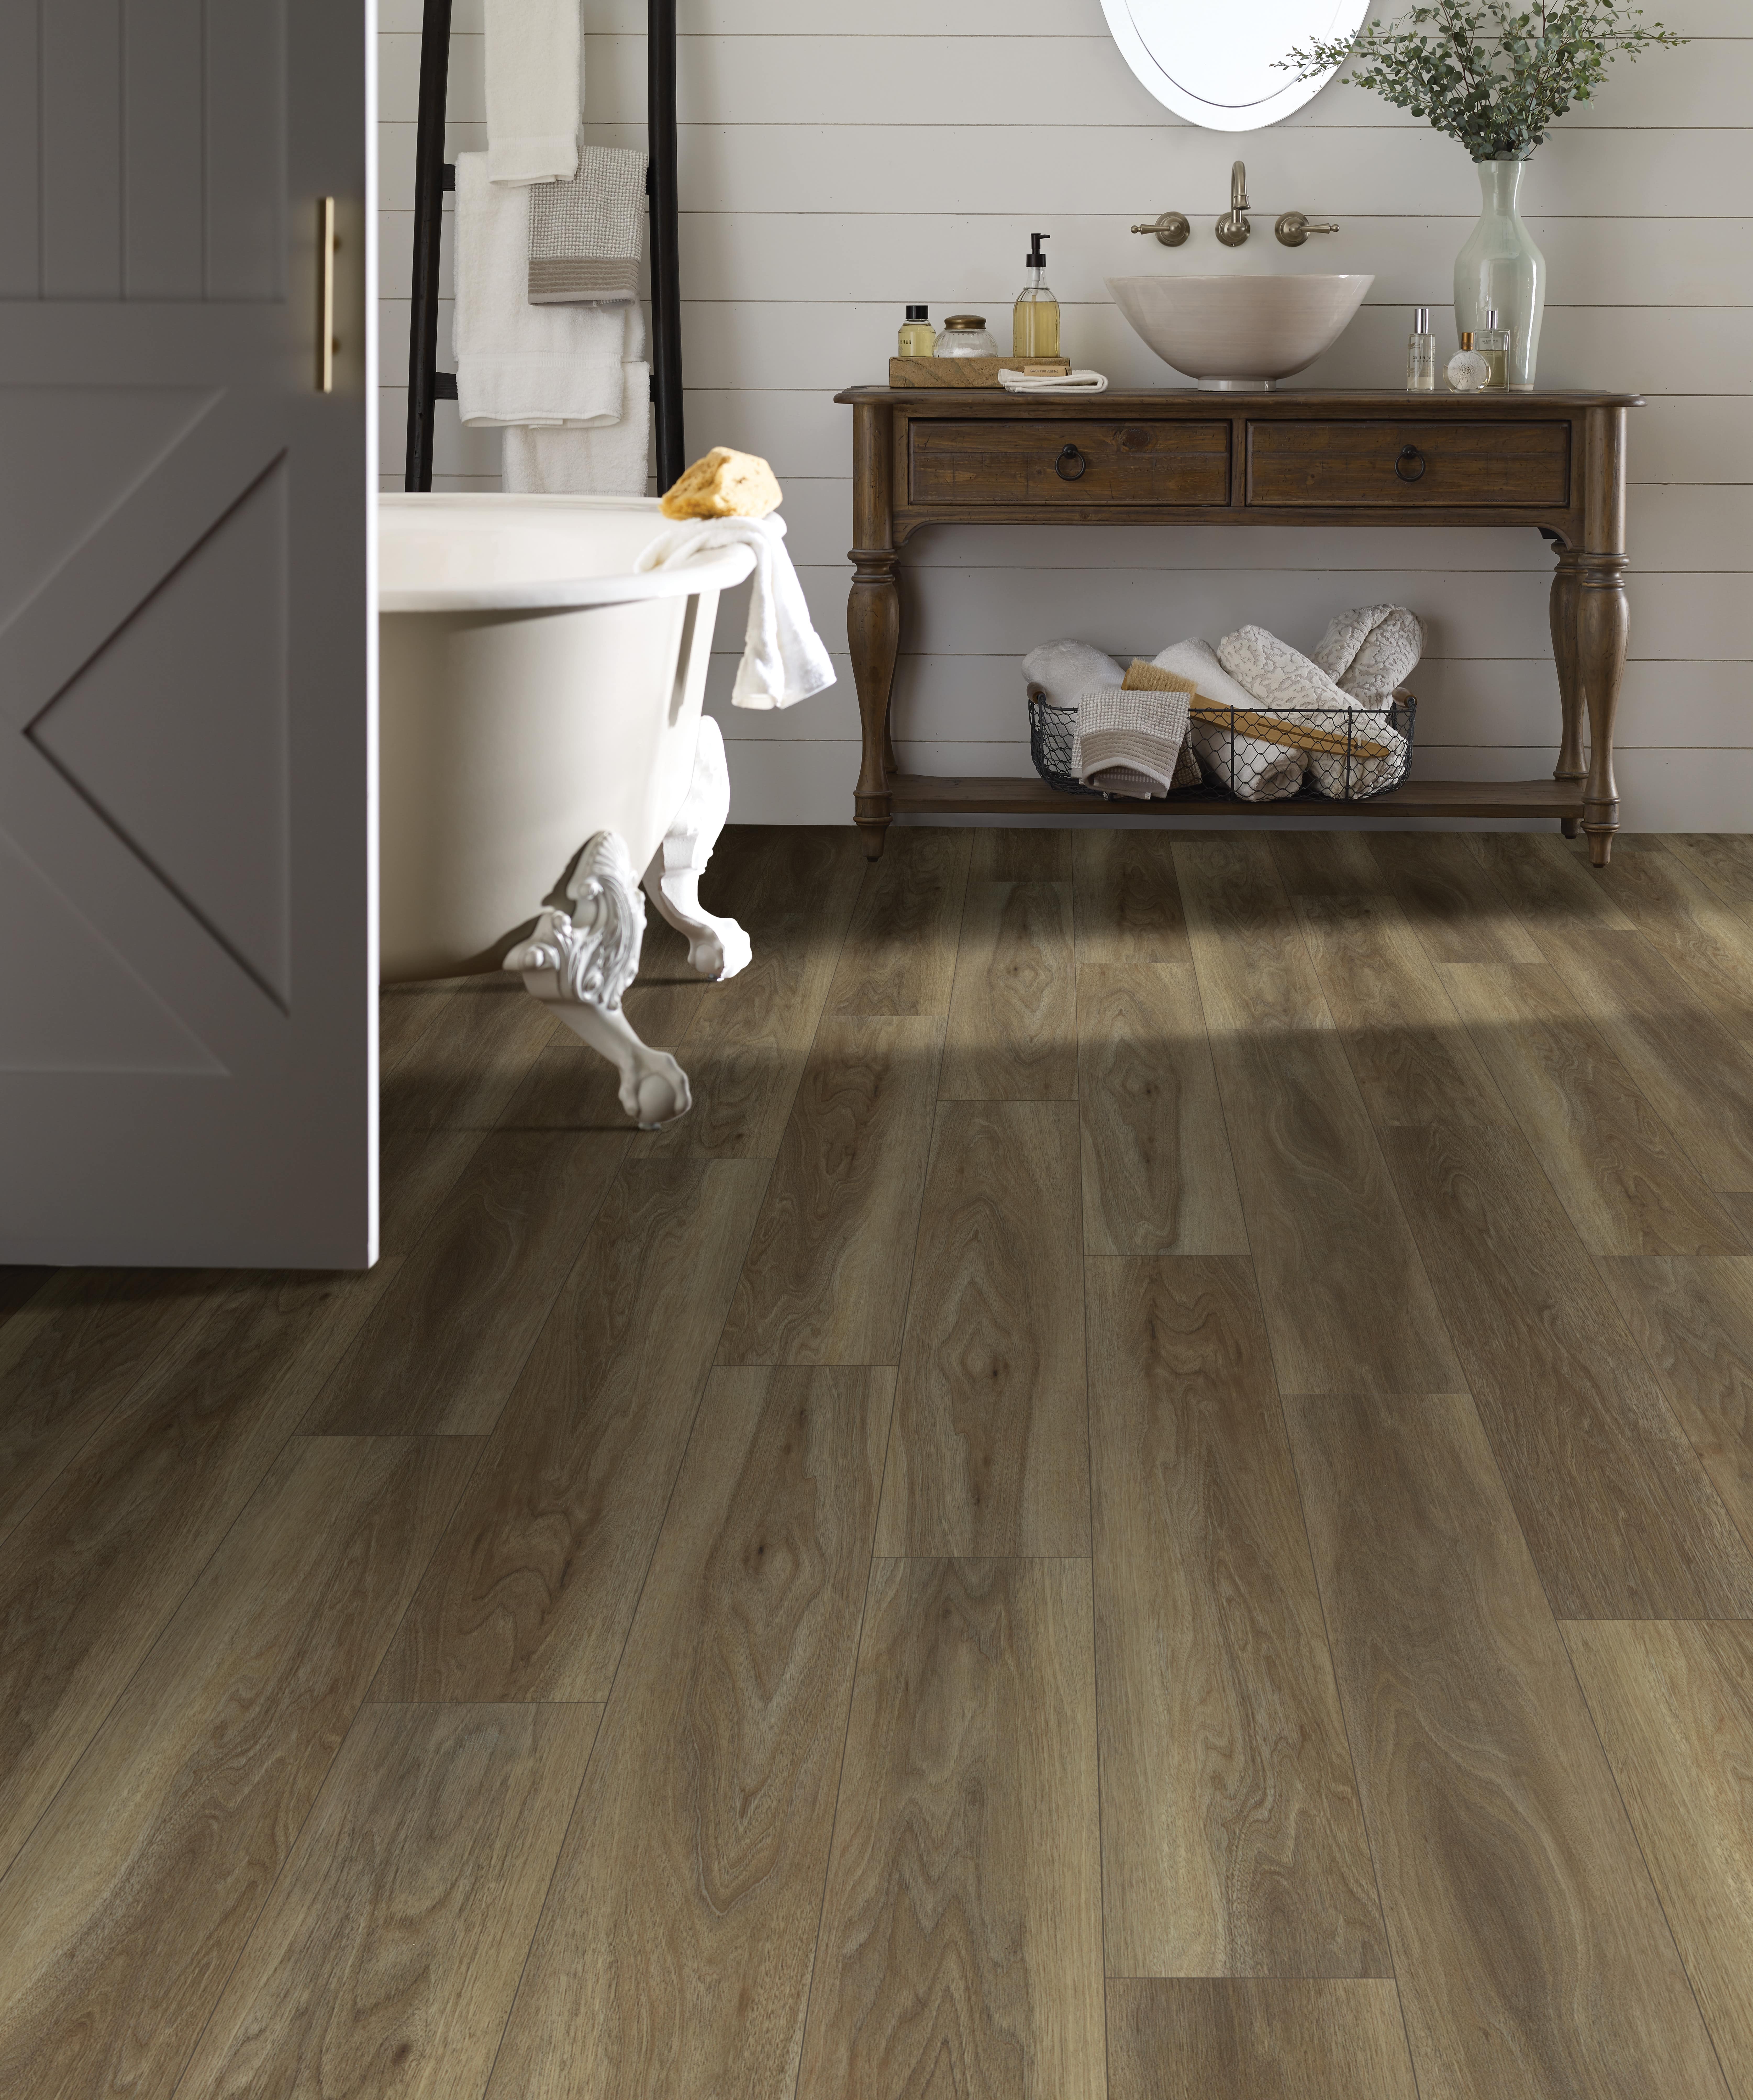 Wood Floor Bathrooms How To Do Them, How To Put Down Laminate Flooring In Bathroom